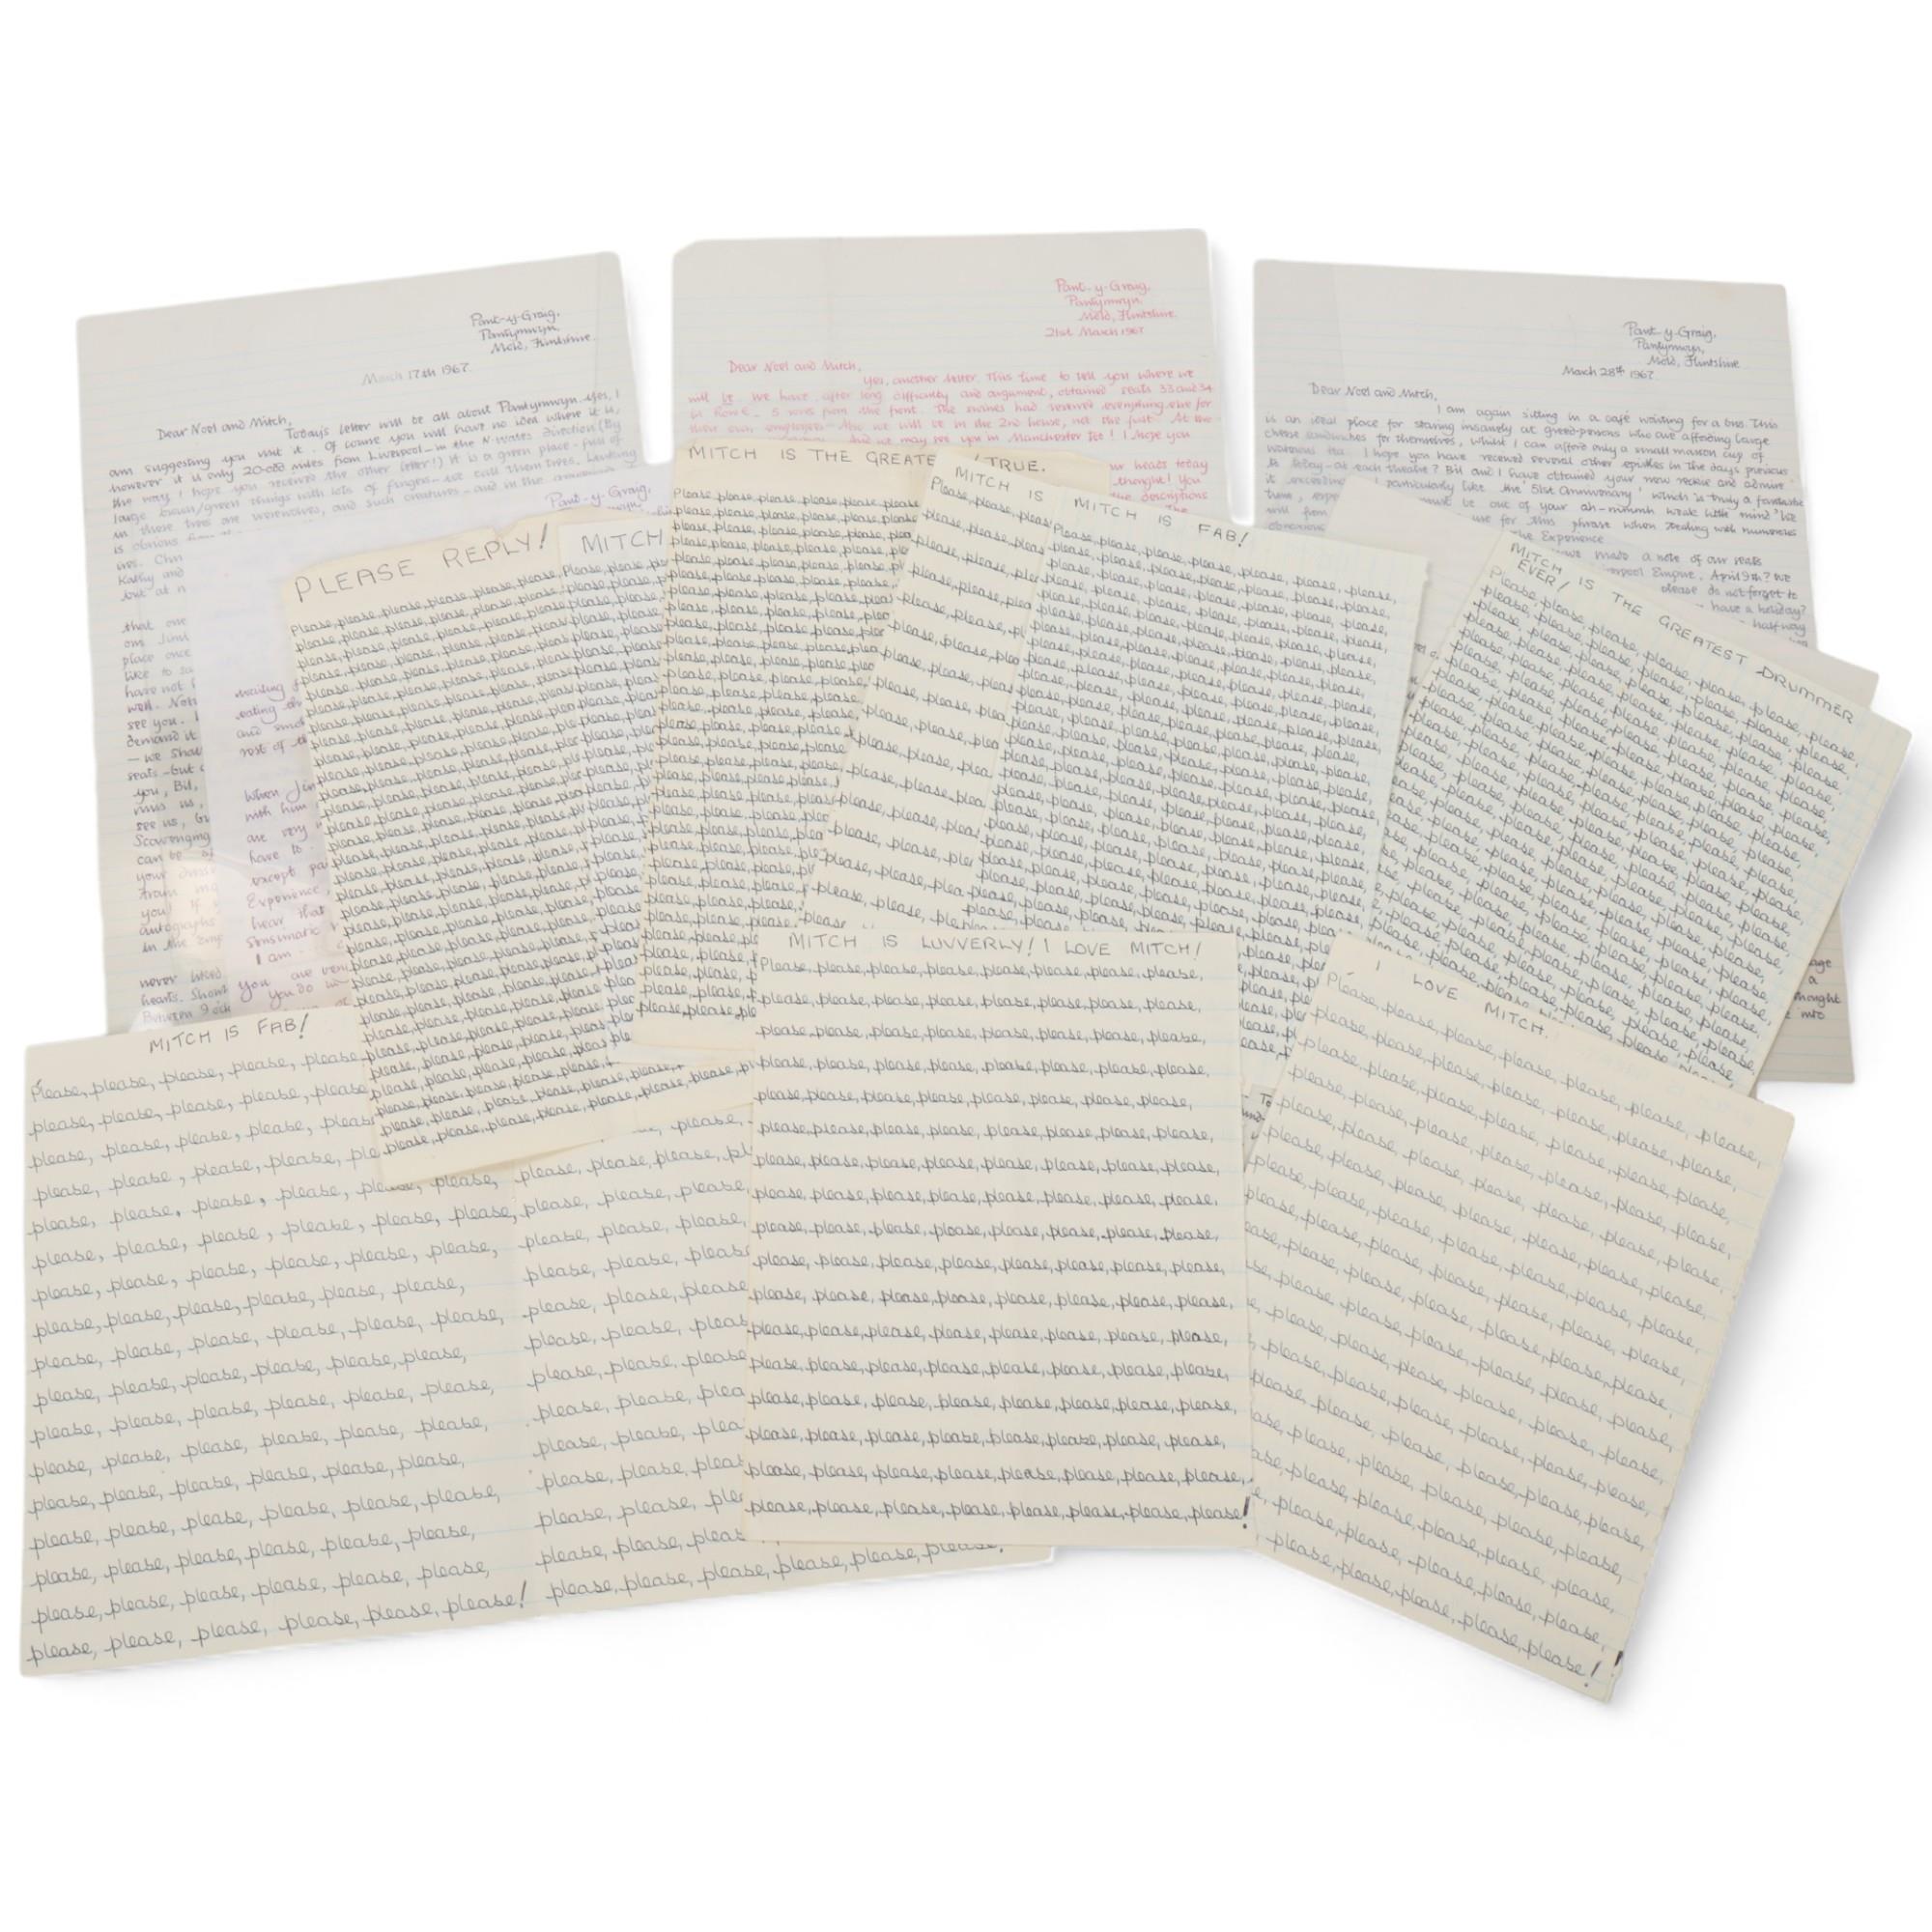 JIMI HENDRIX EXPERIENCE INTEREST. A large quantity of original FAN MAIL letters addressed to MITCH